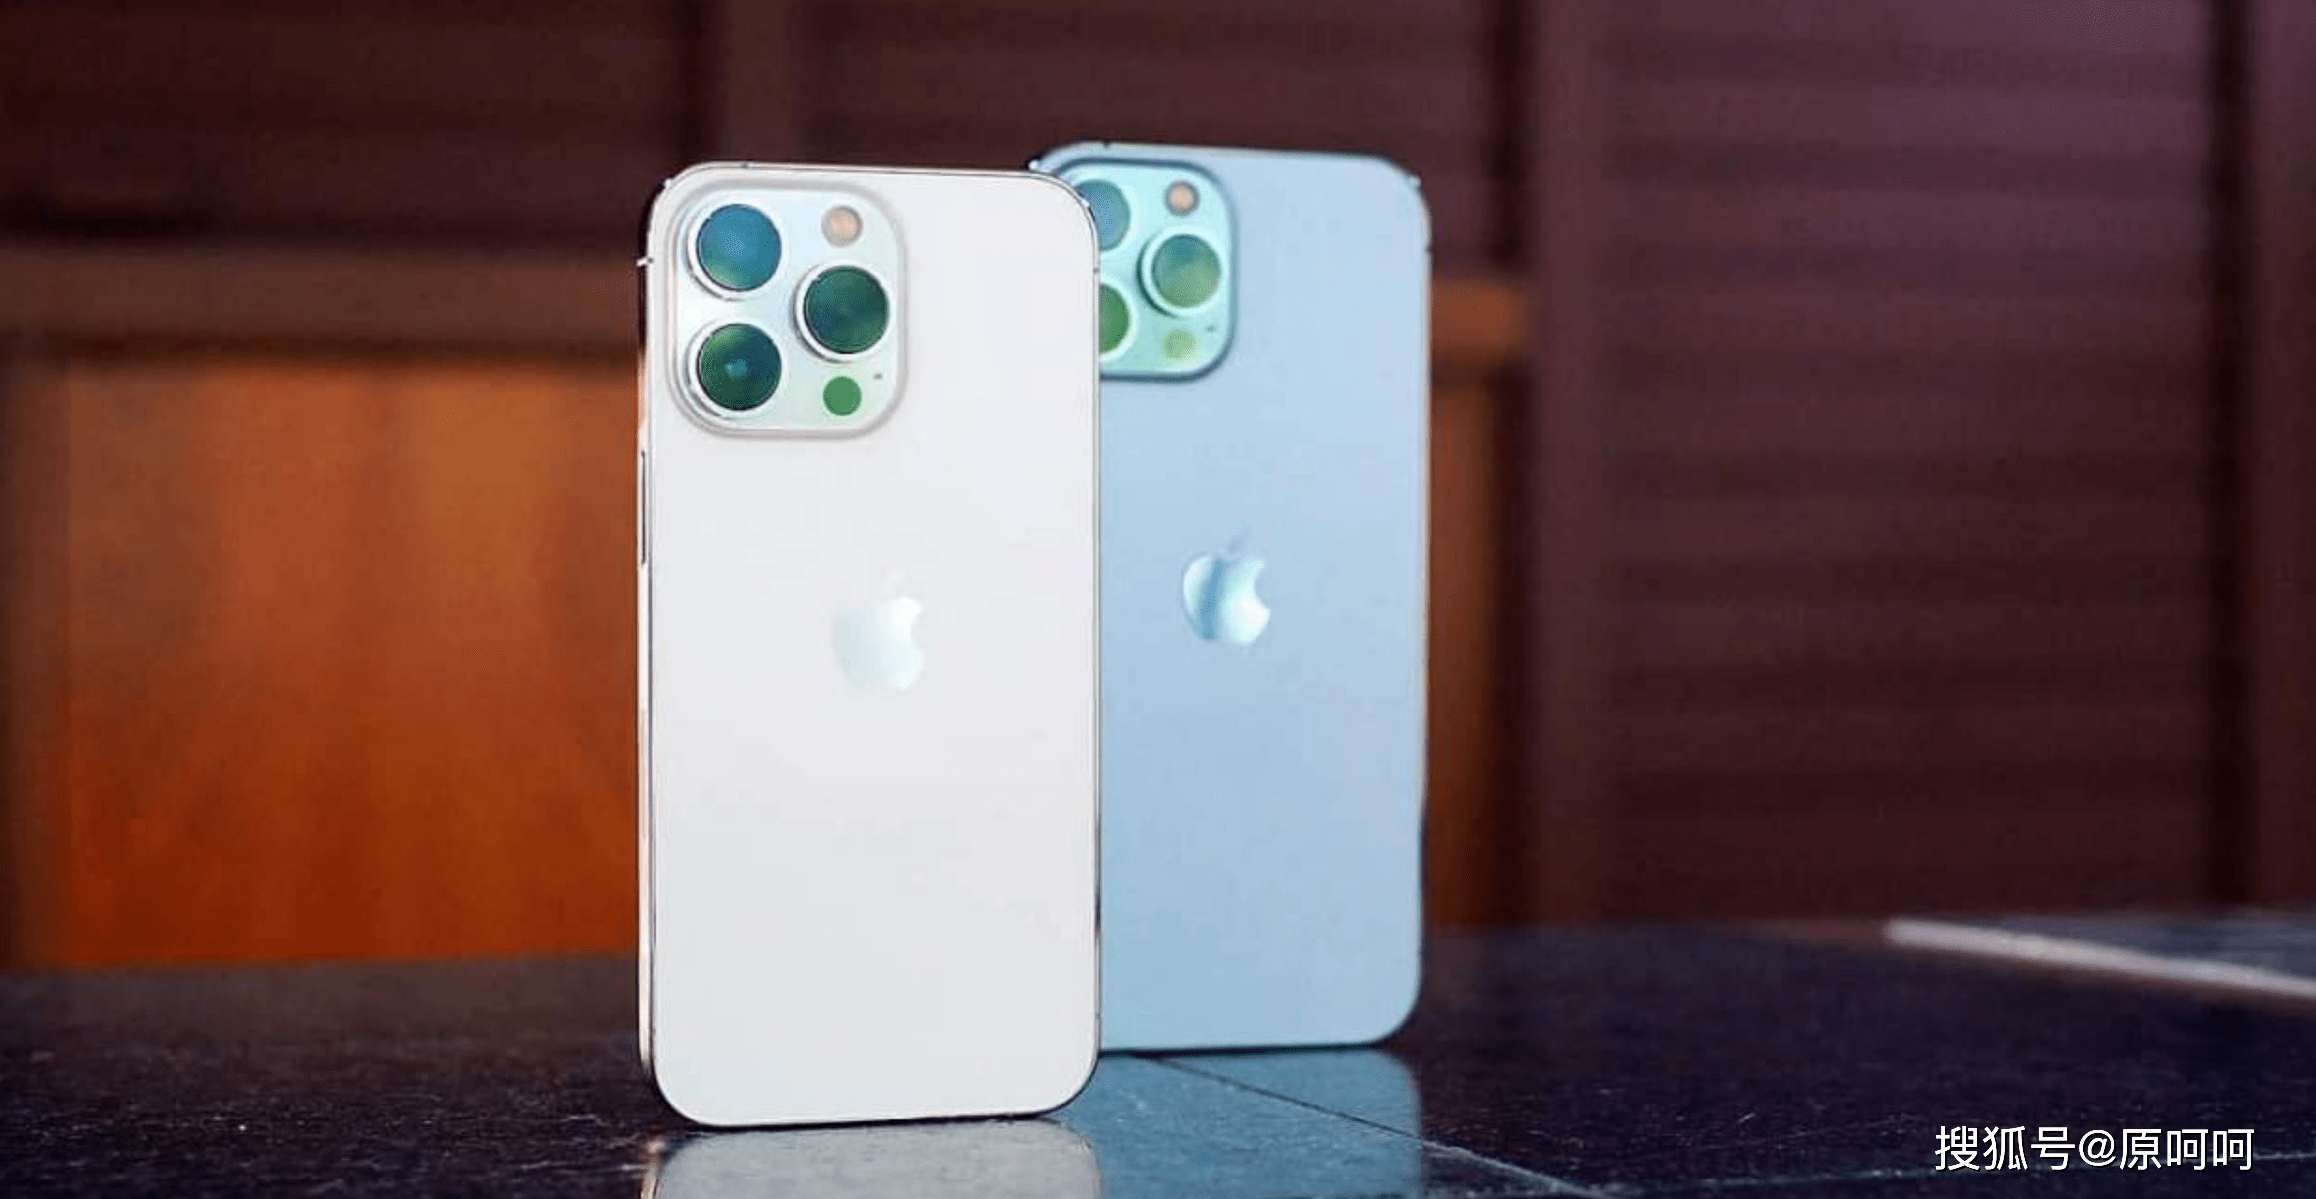 Onlookers! Three pinnacle mobile phones to be launched in 2022: iPhone 14 and other top mobile phones are shocking add/titleonlyGalaxy add/titleonly系列 add/titleonlyApple | e5d4d83b783a4935bef9632067c75474